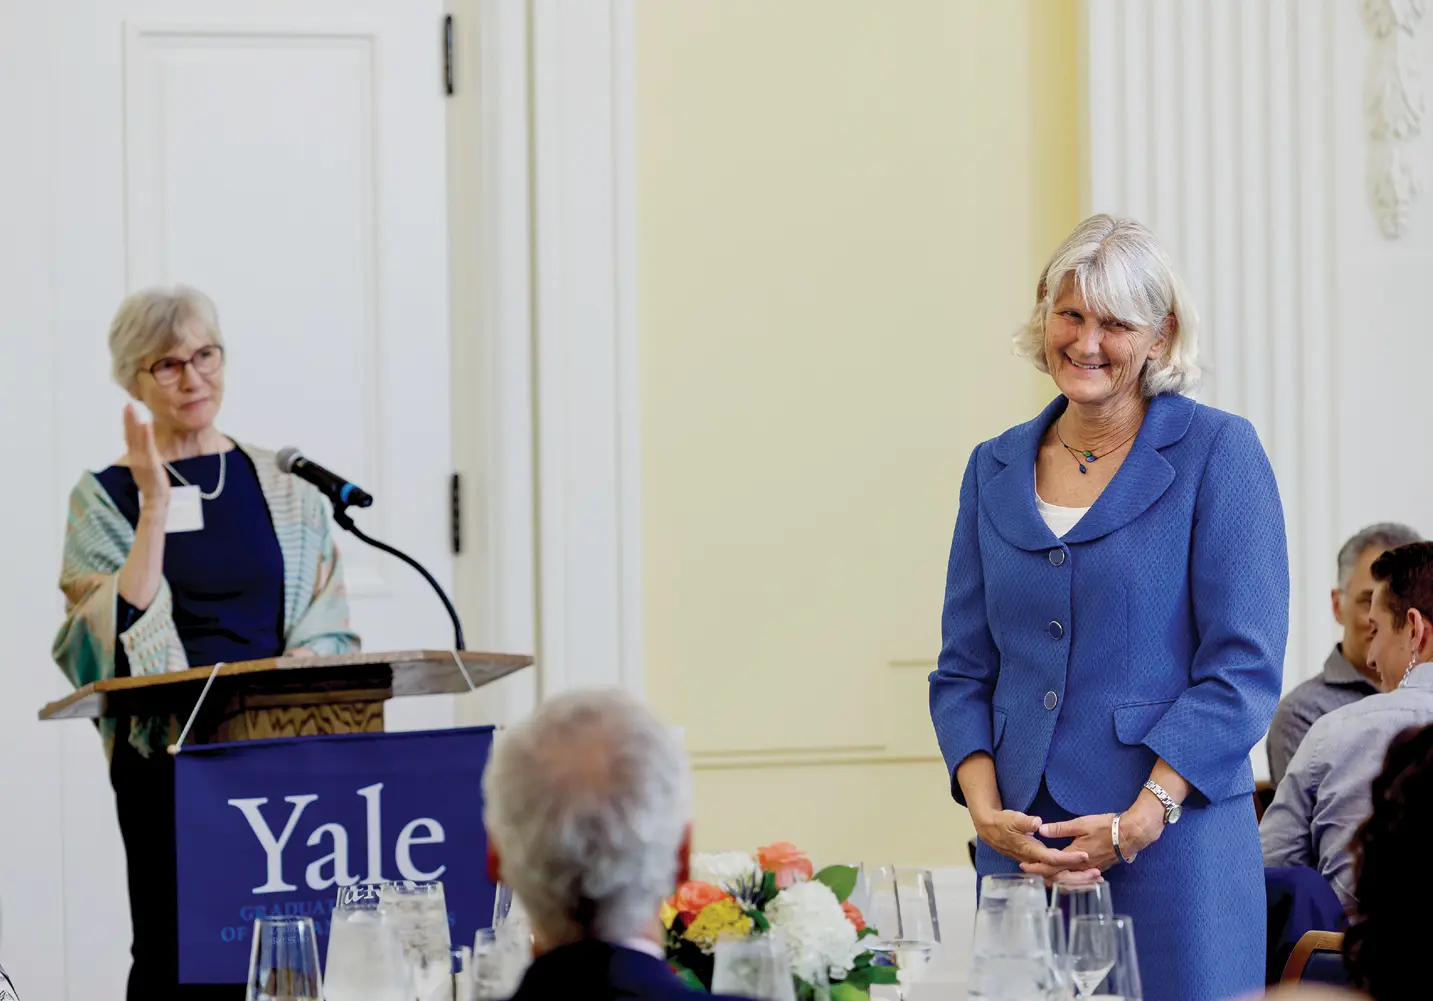 President Bradley being awarded at a Yale ceremony